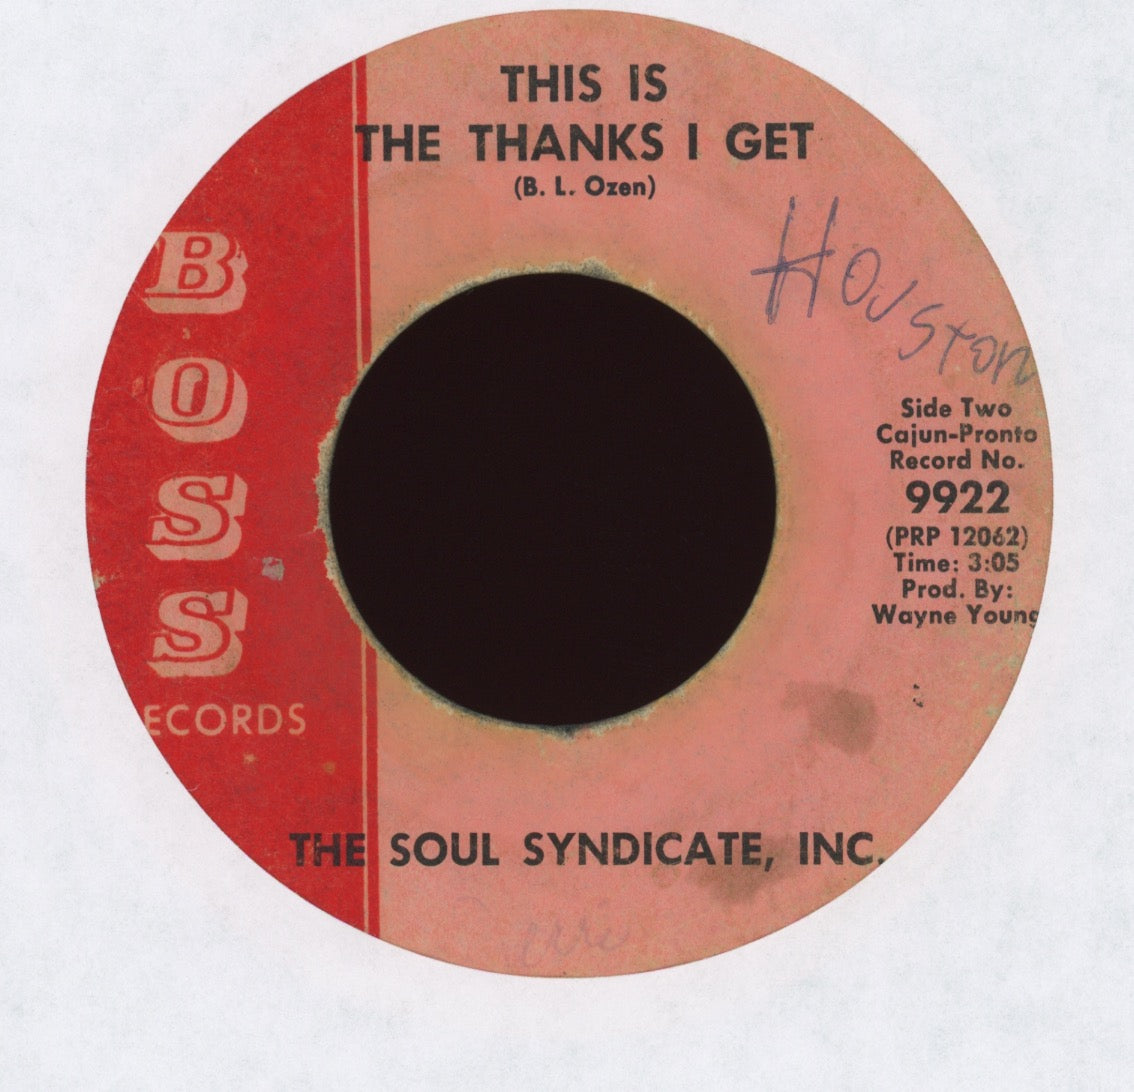 The Soul Syndicate, Inc. - This is The Thanks I Get on Boss